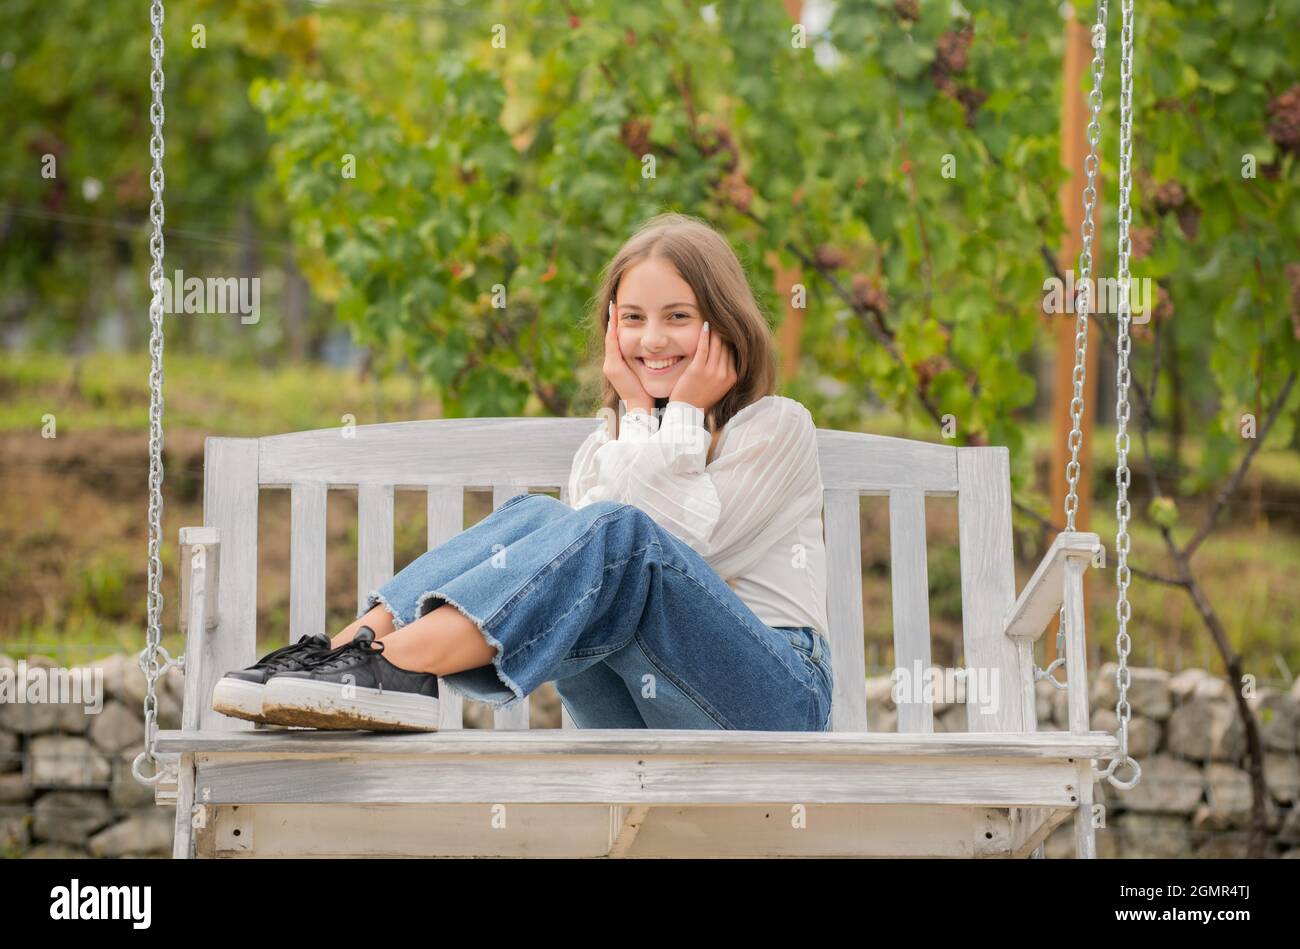 cheerful teen girl having free time outside on swing, relaxation Stock Photo